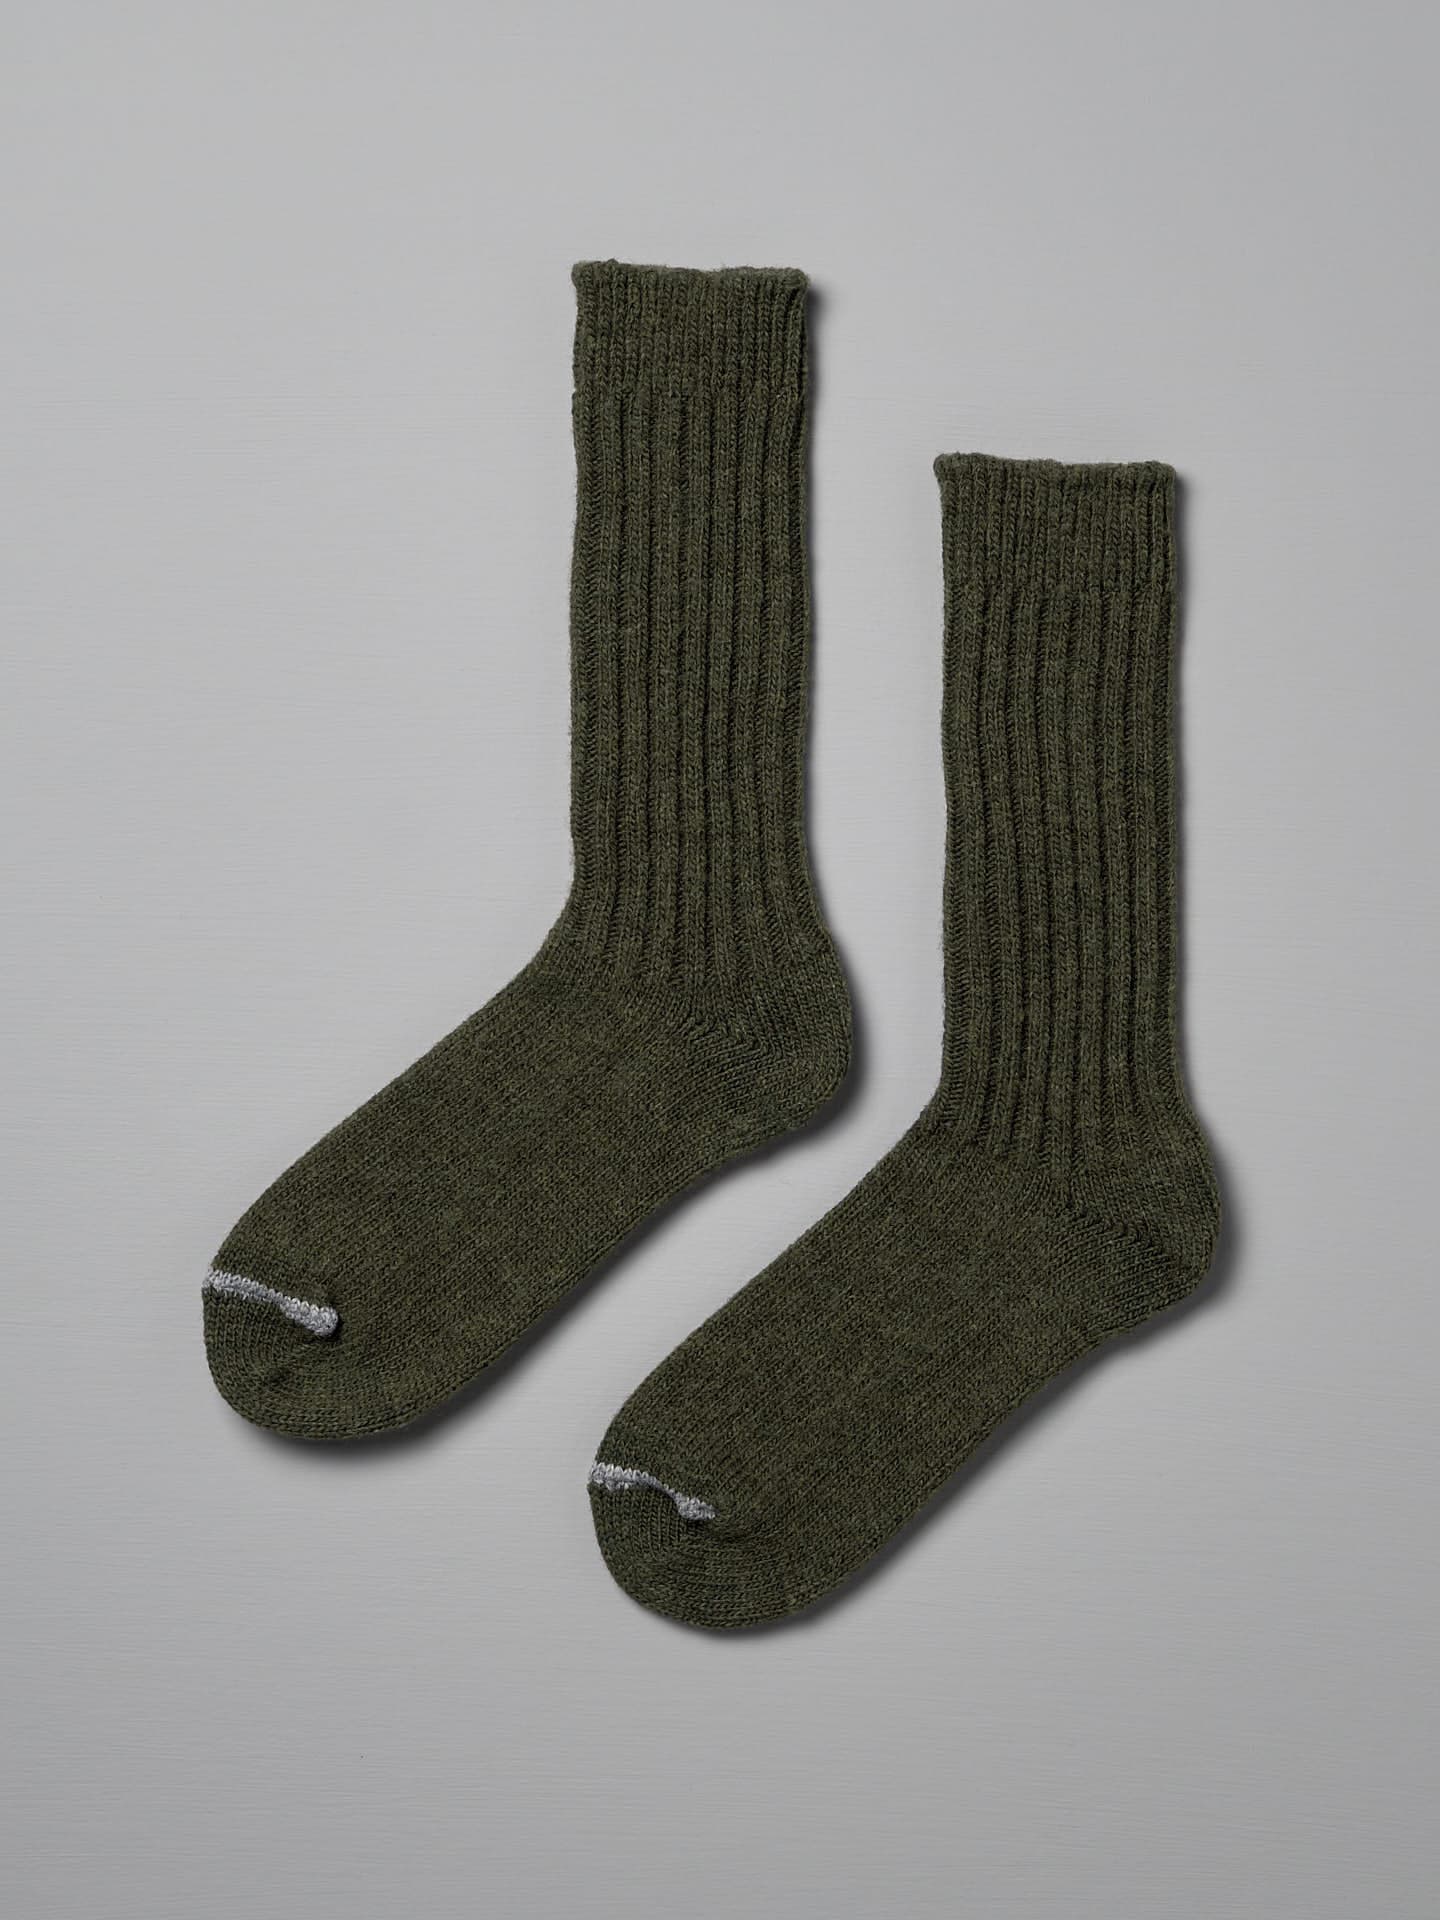 A pair of green knitted socks with ribbed cuffs and white toes, displayed side by side on a grey background, perfect for checking your Men's US size chart. Product Name: Praha Wool Ribbed Socks – Khaki Brand Name: Nishiguchi Kutsushita